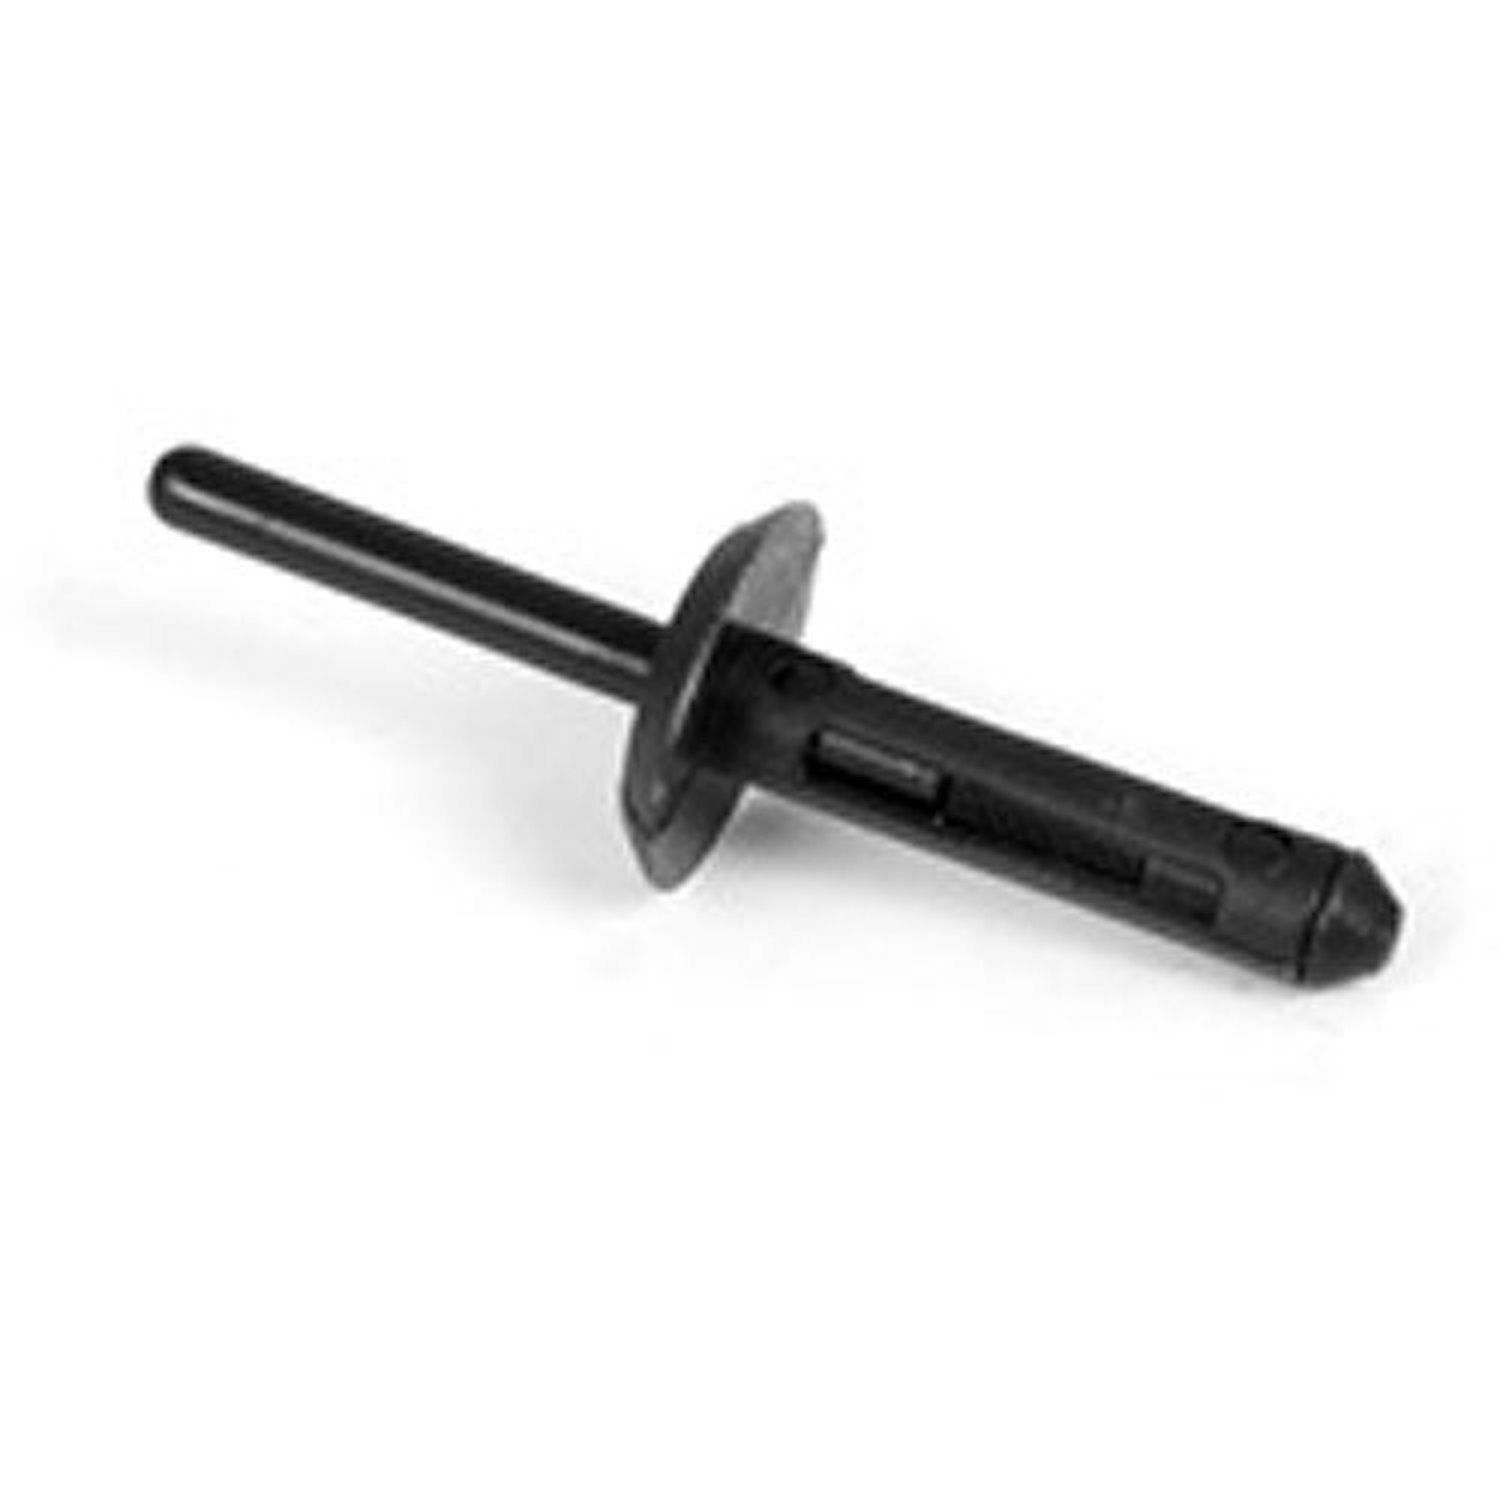 This nylon blind rivet from Omix-ADA fits the factory fender flares on 07-16 Jeep Wrangler JK.